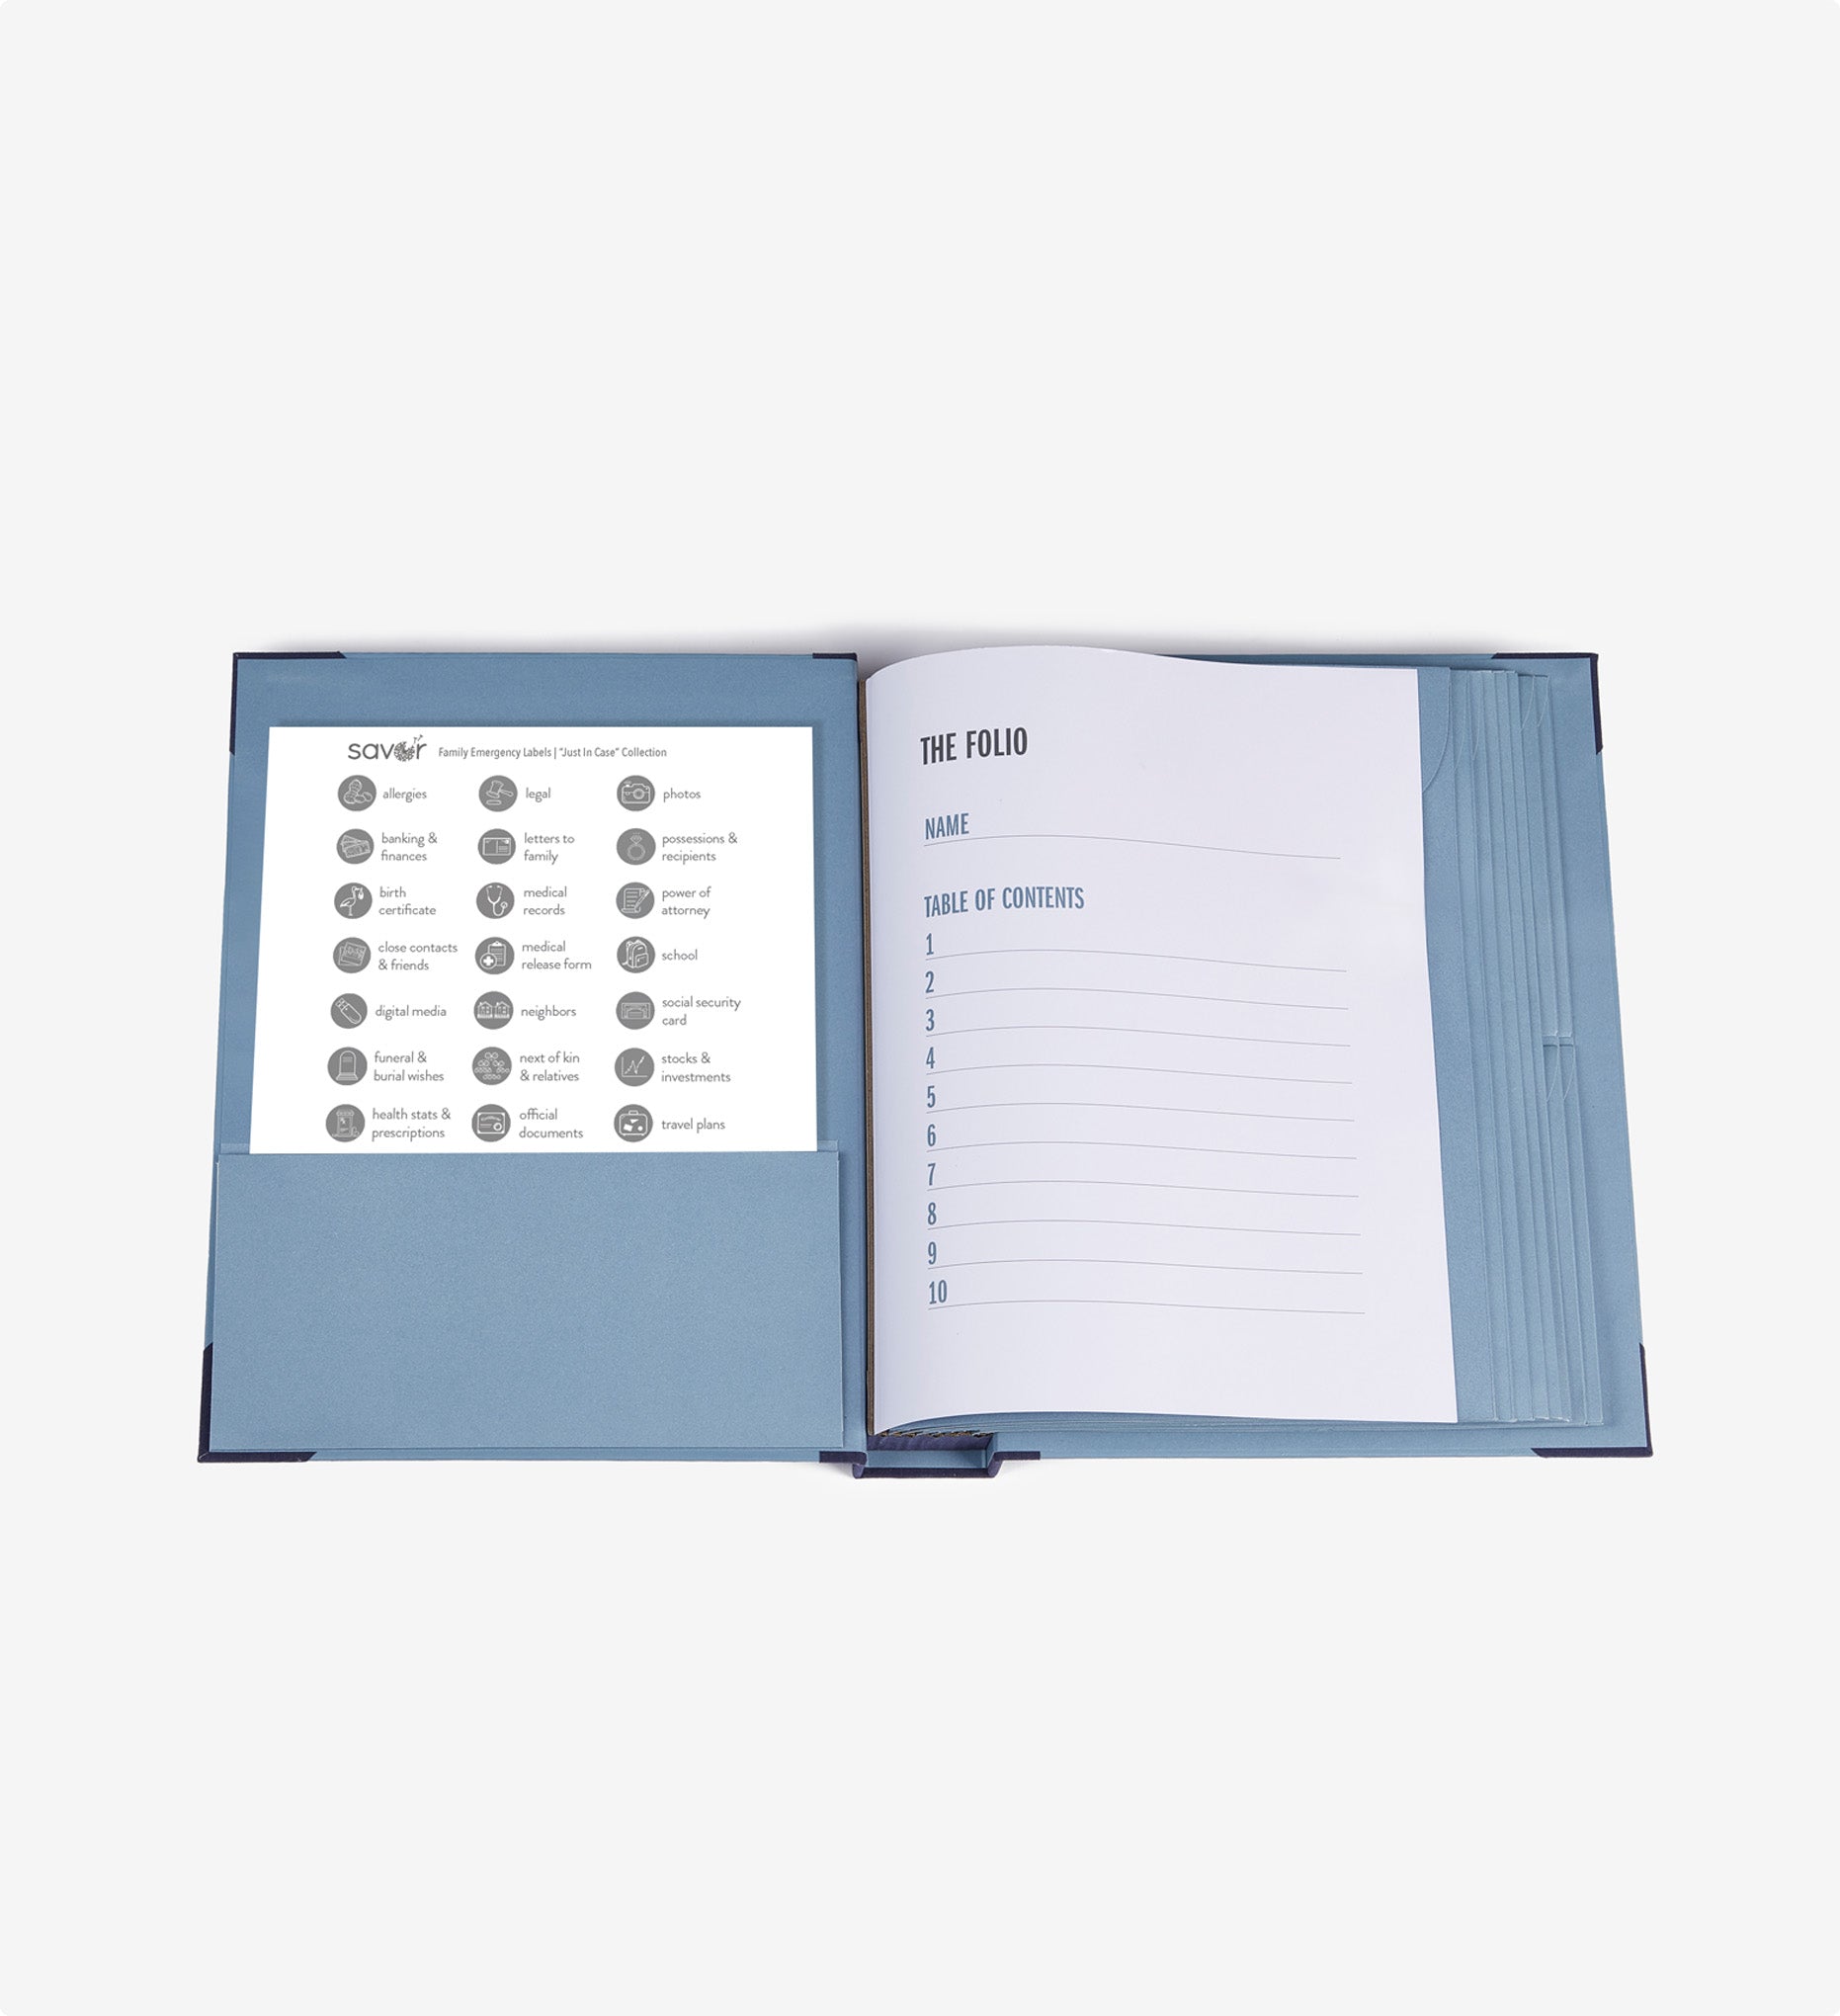 savor something blue folio document organizer open showig table of contents and labels